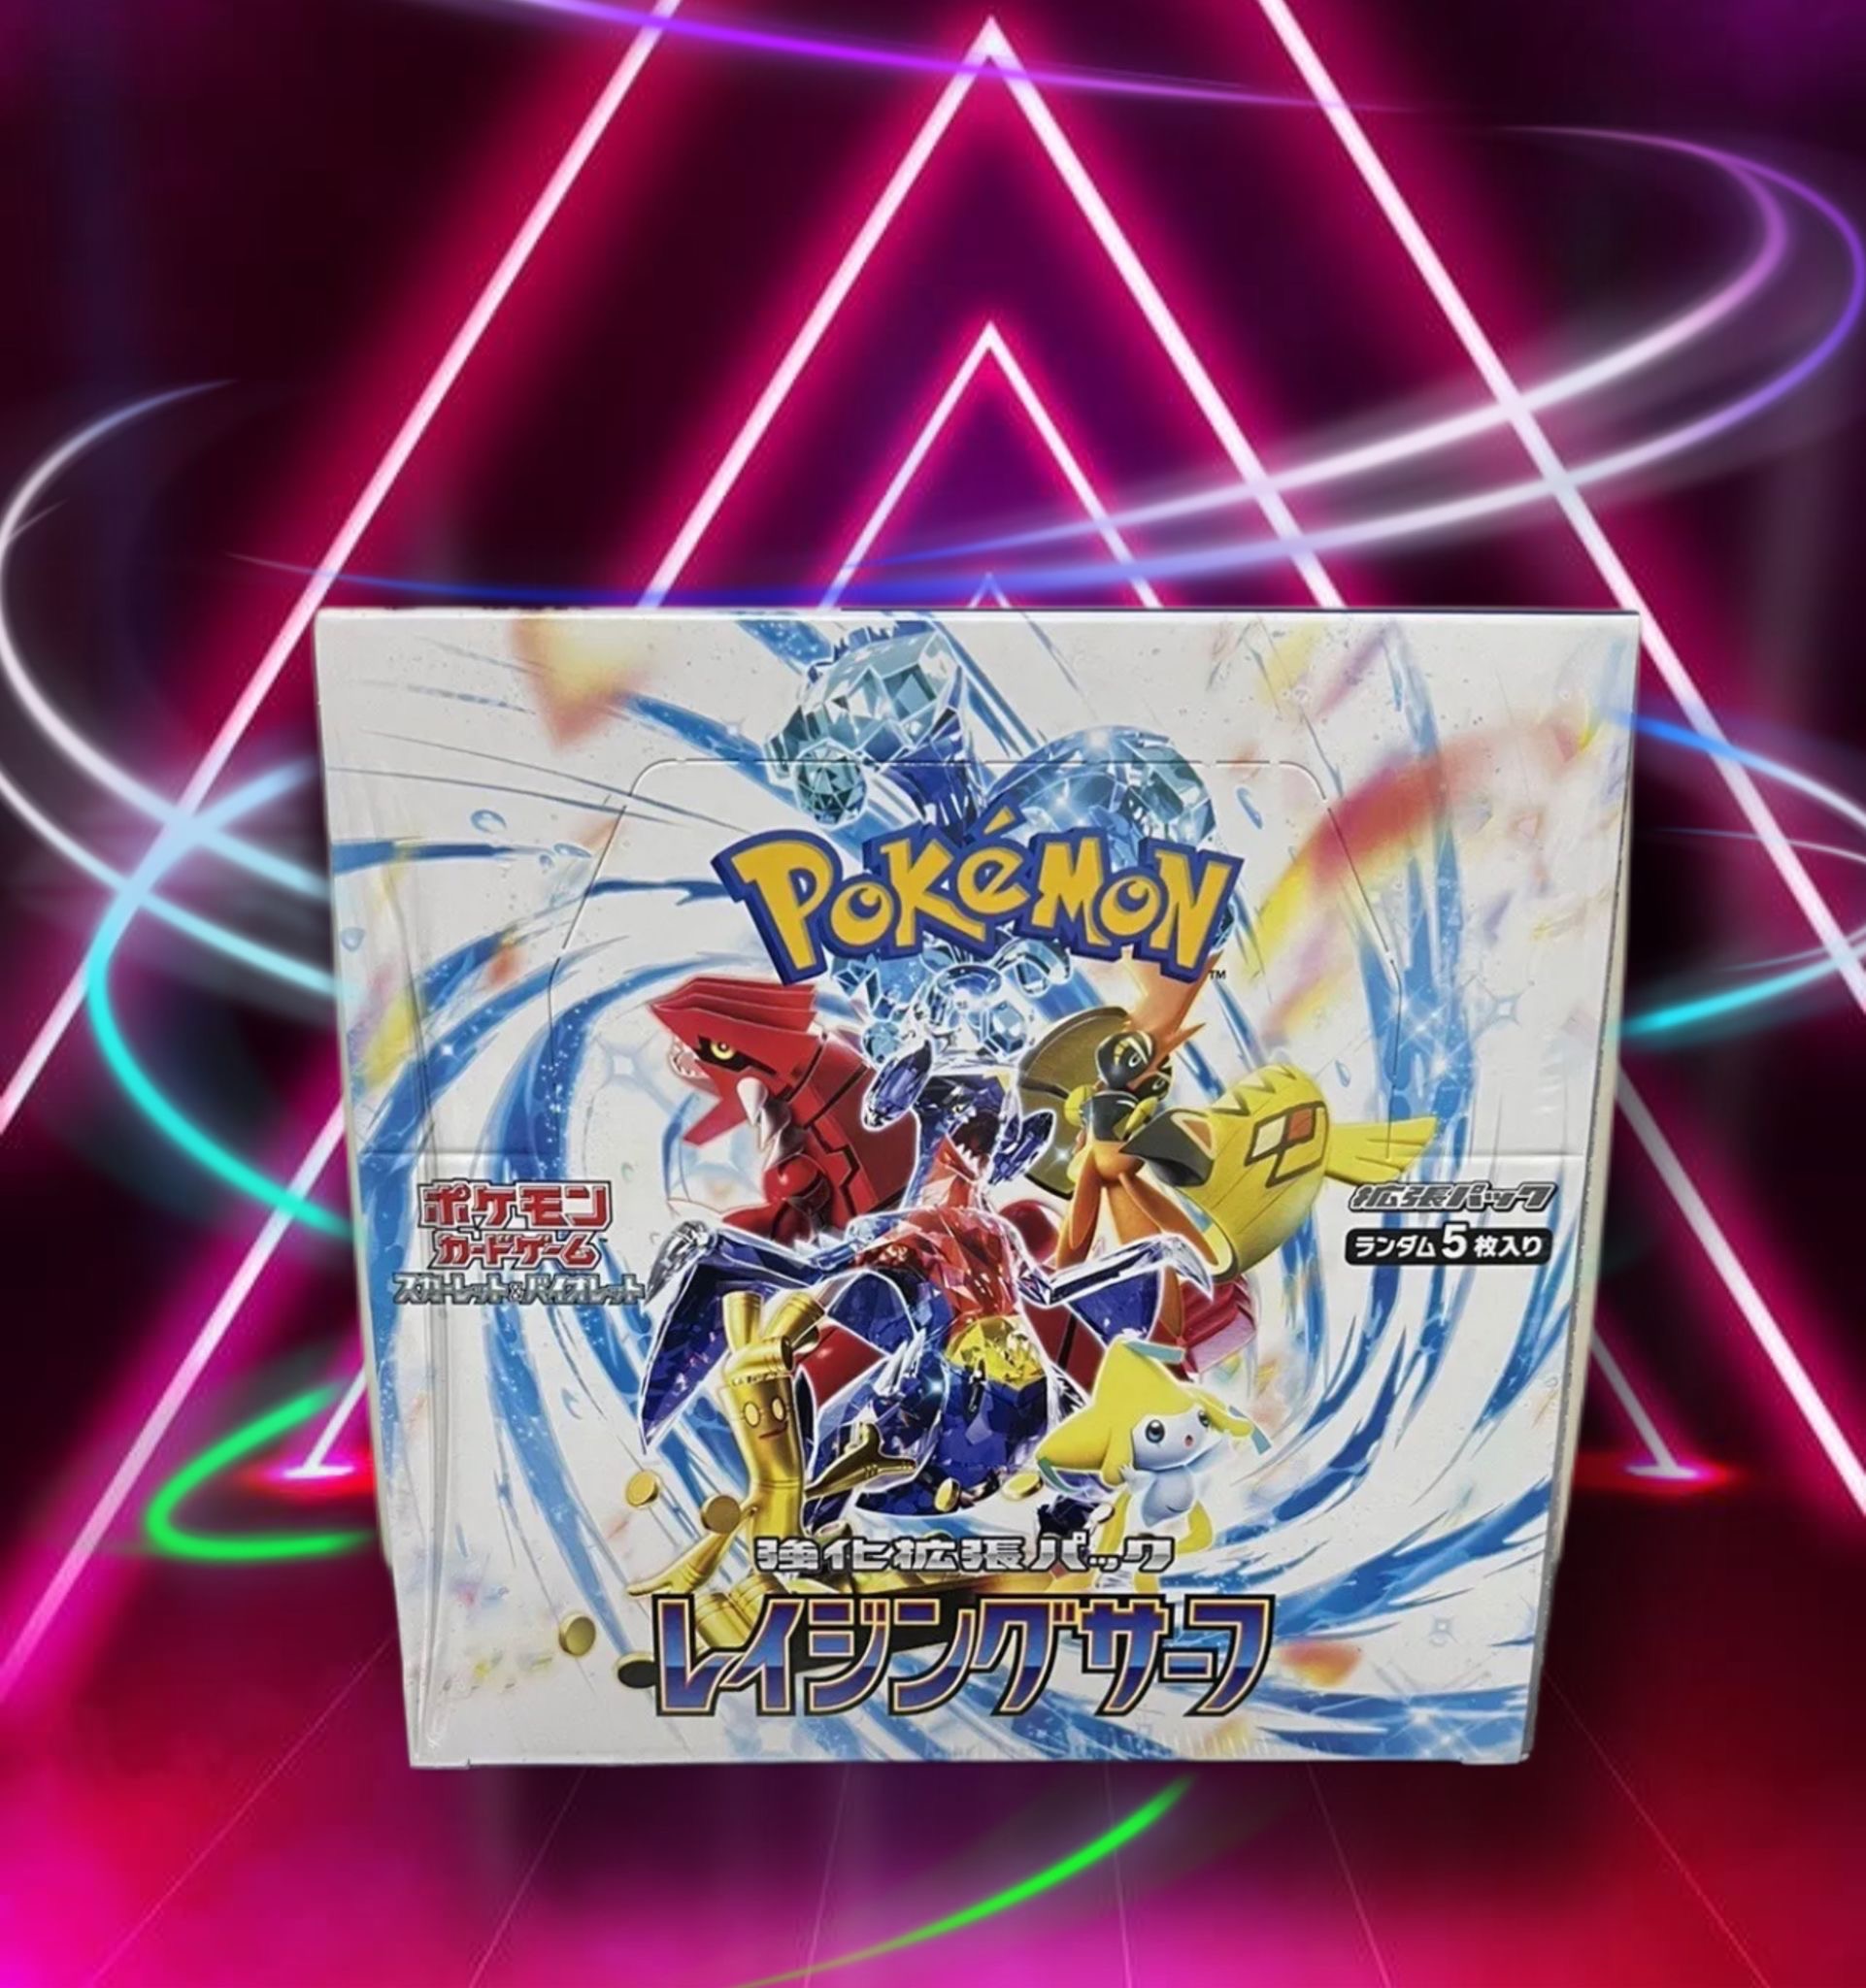 POKEMON CARD GAME BOOSTER